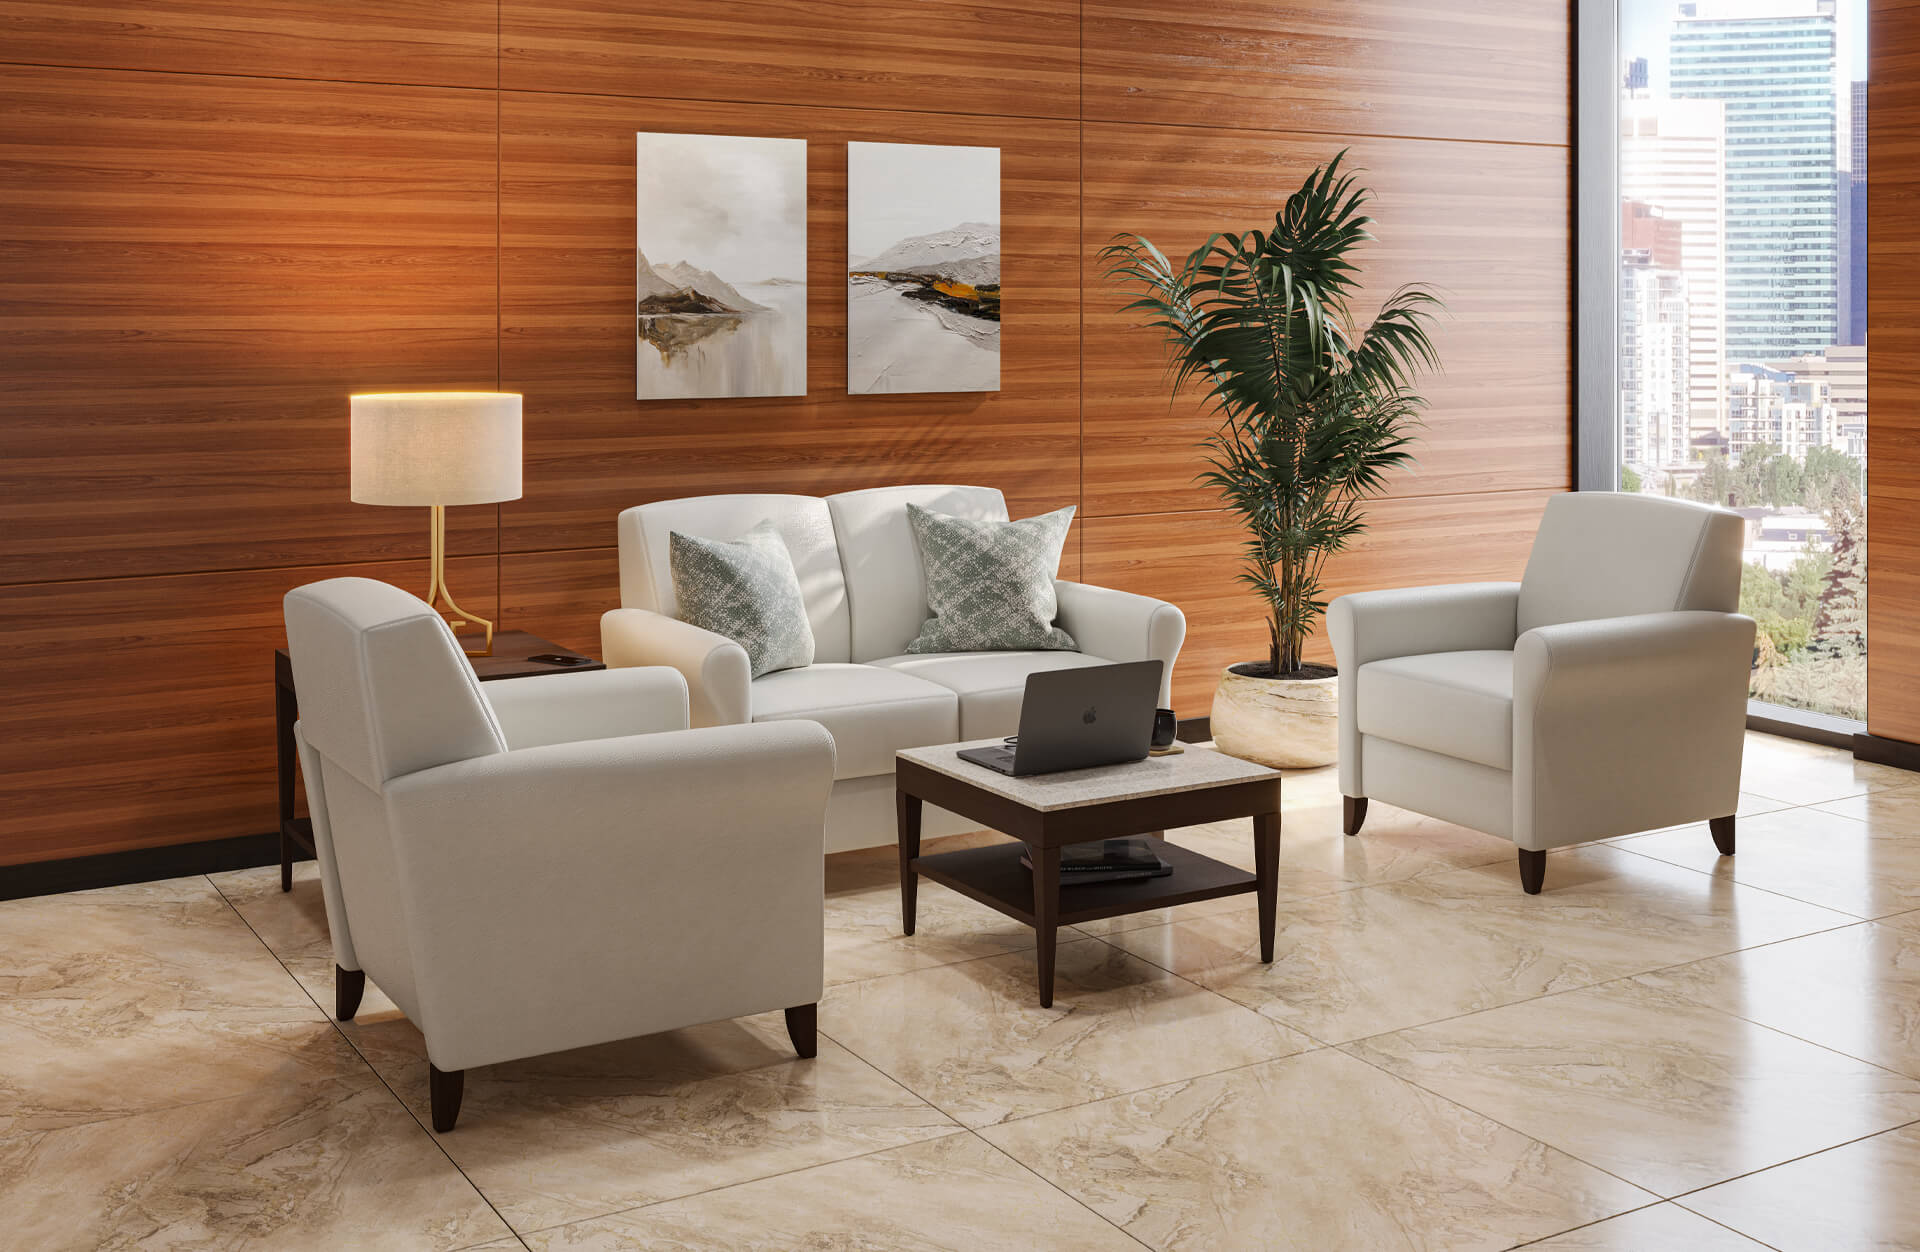 Lobby Furniture Lifestyle 3D Rendering